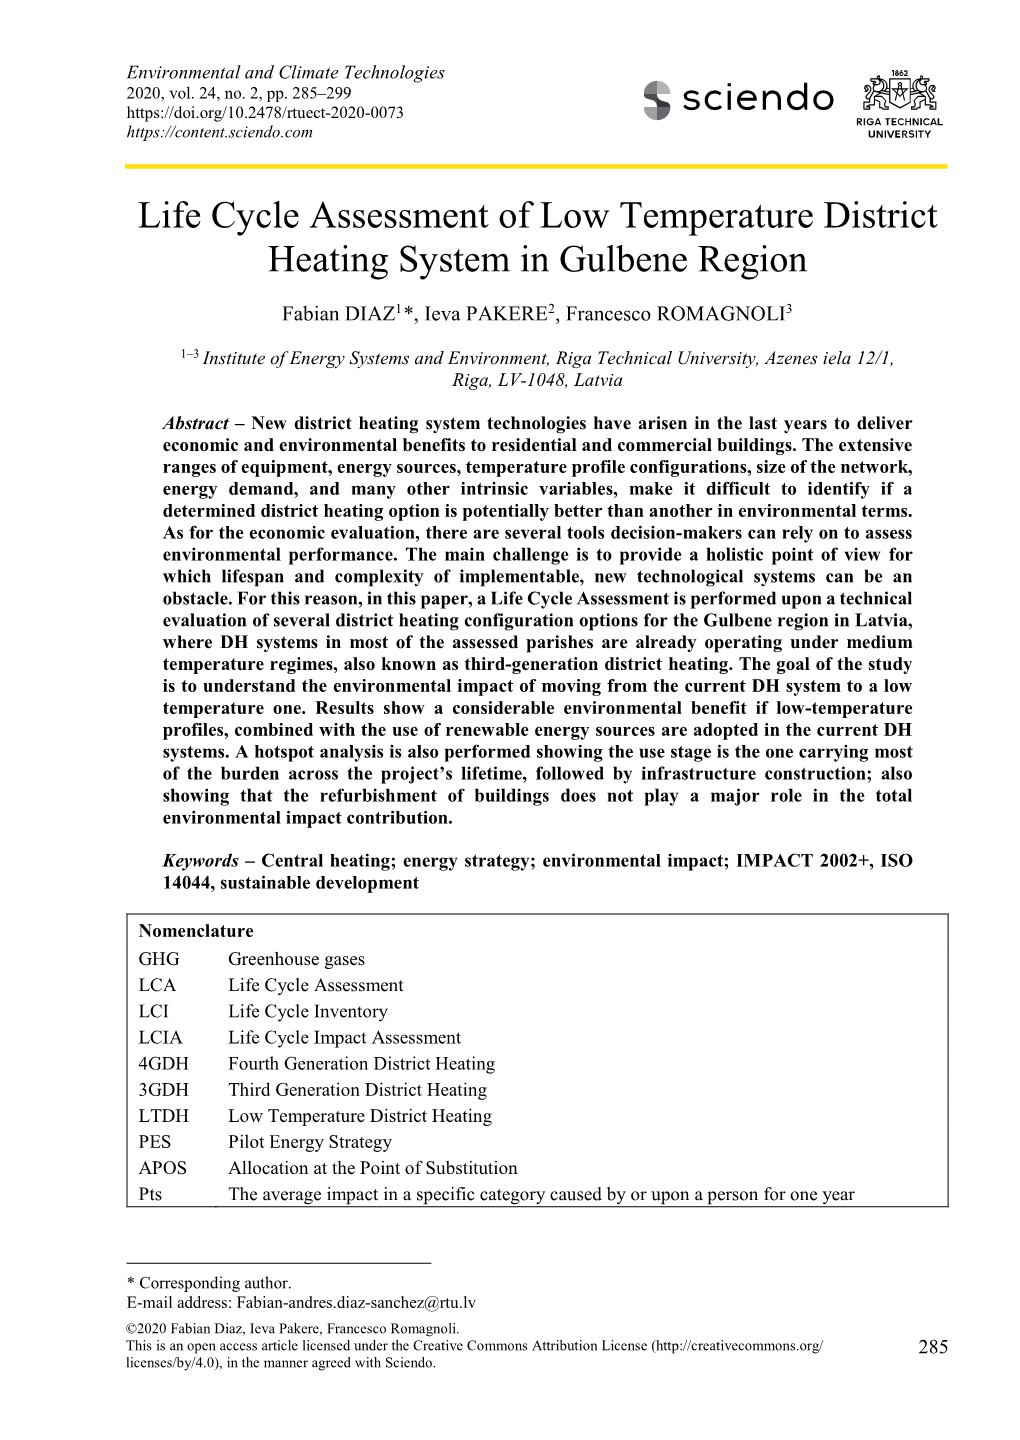 Life Cycle Assessment of Low Temperature District Heating System in Gulbene Region